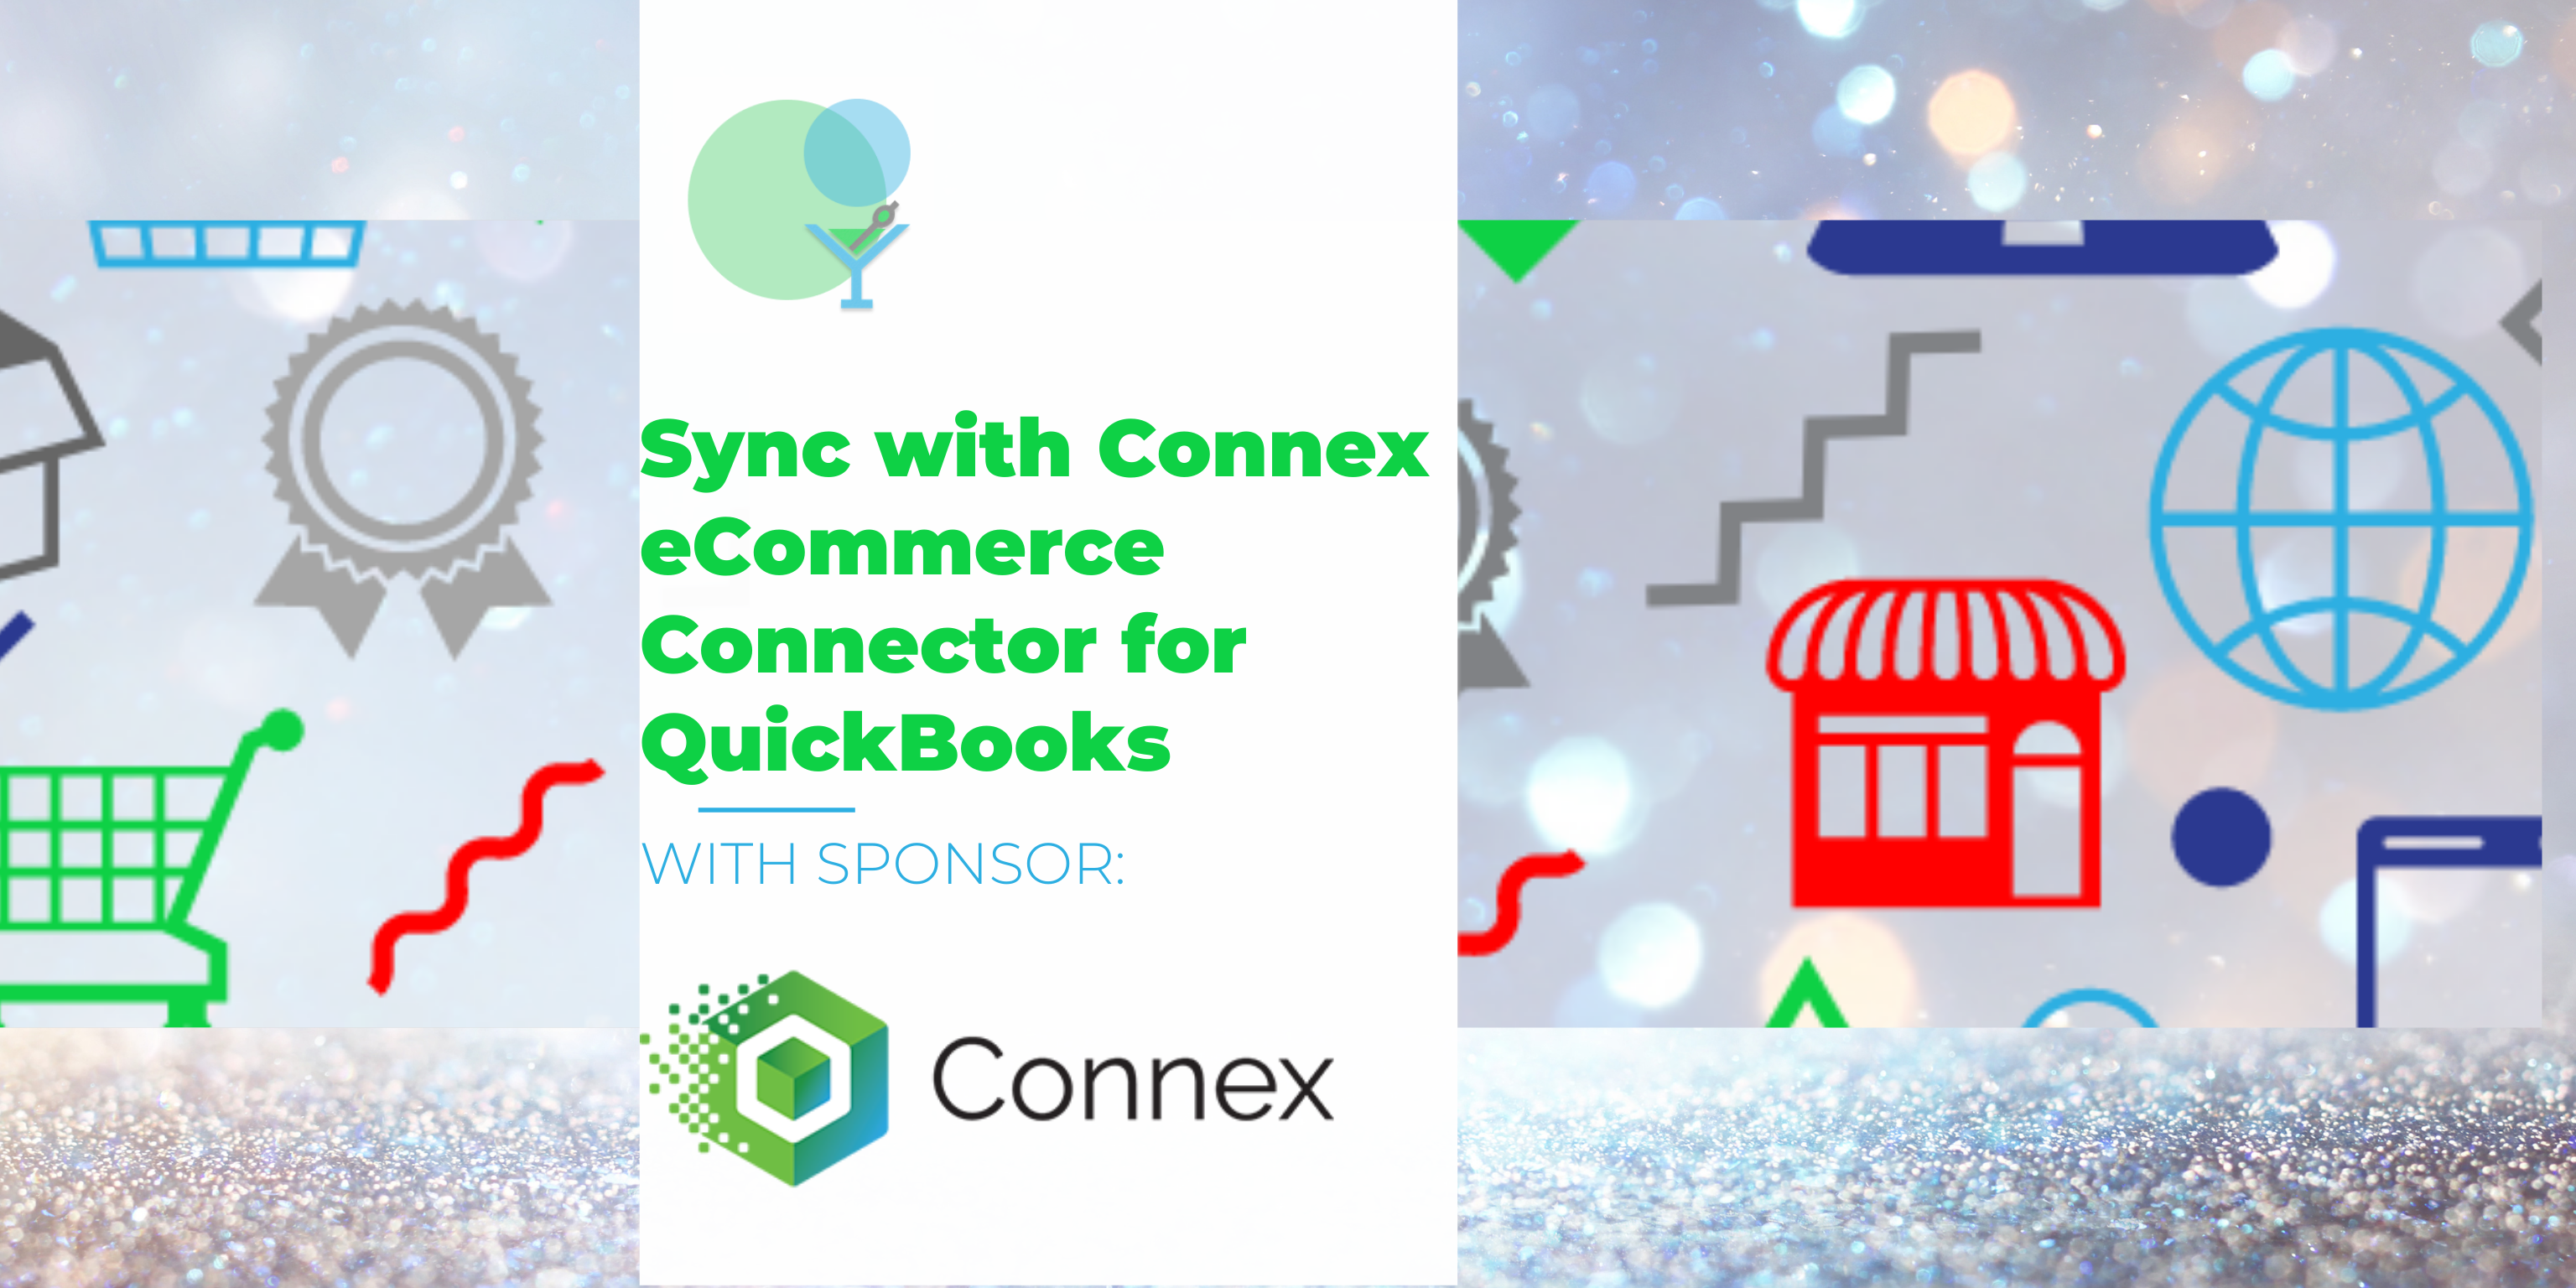 Simplify eCommerce Accounting with Syn with Connex